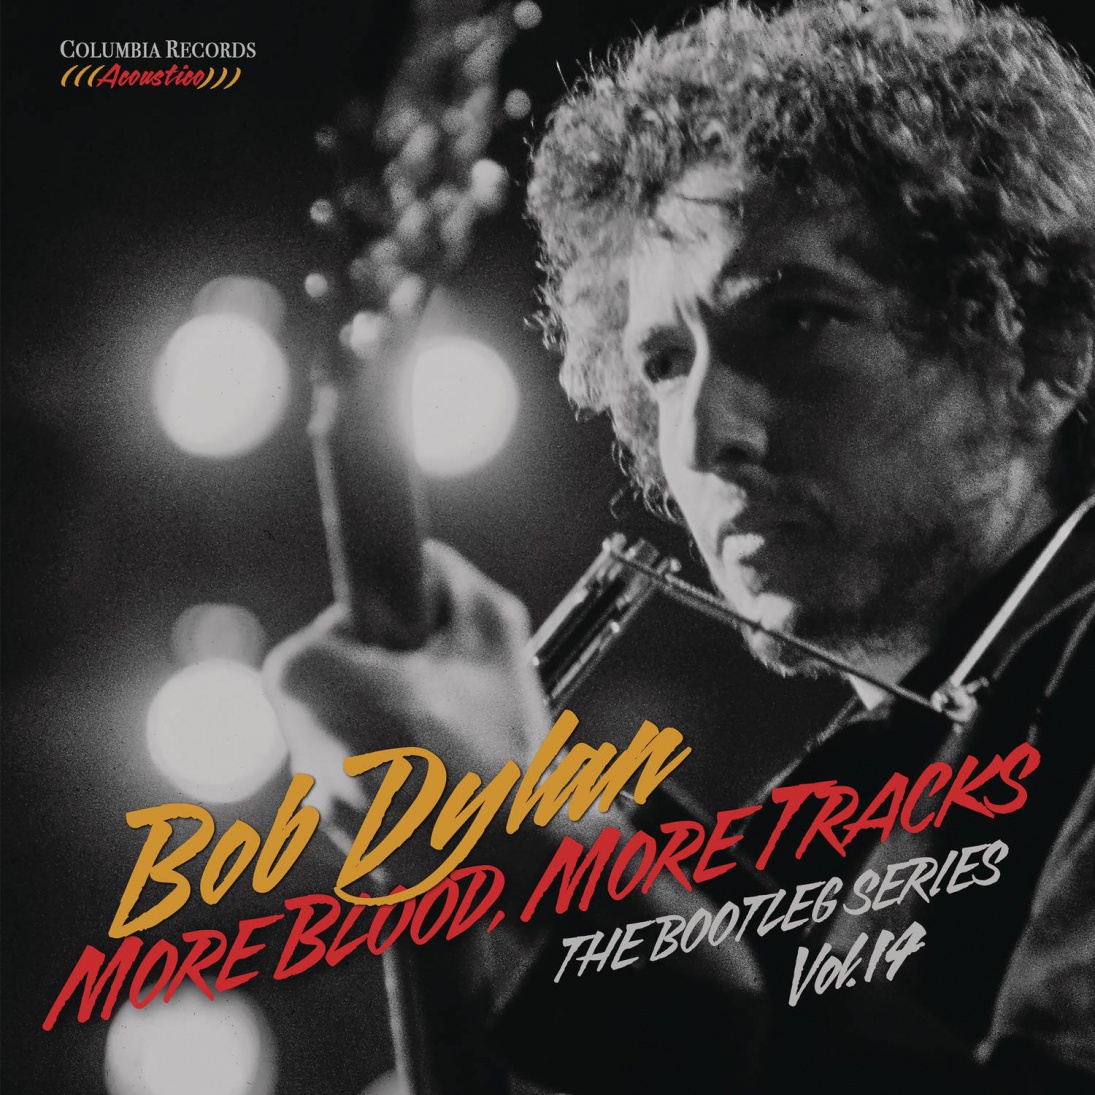 MORE BLOOD, MORE TRACKS THE BOOTLEG SERIES VOL. 14